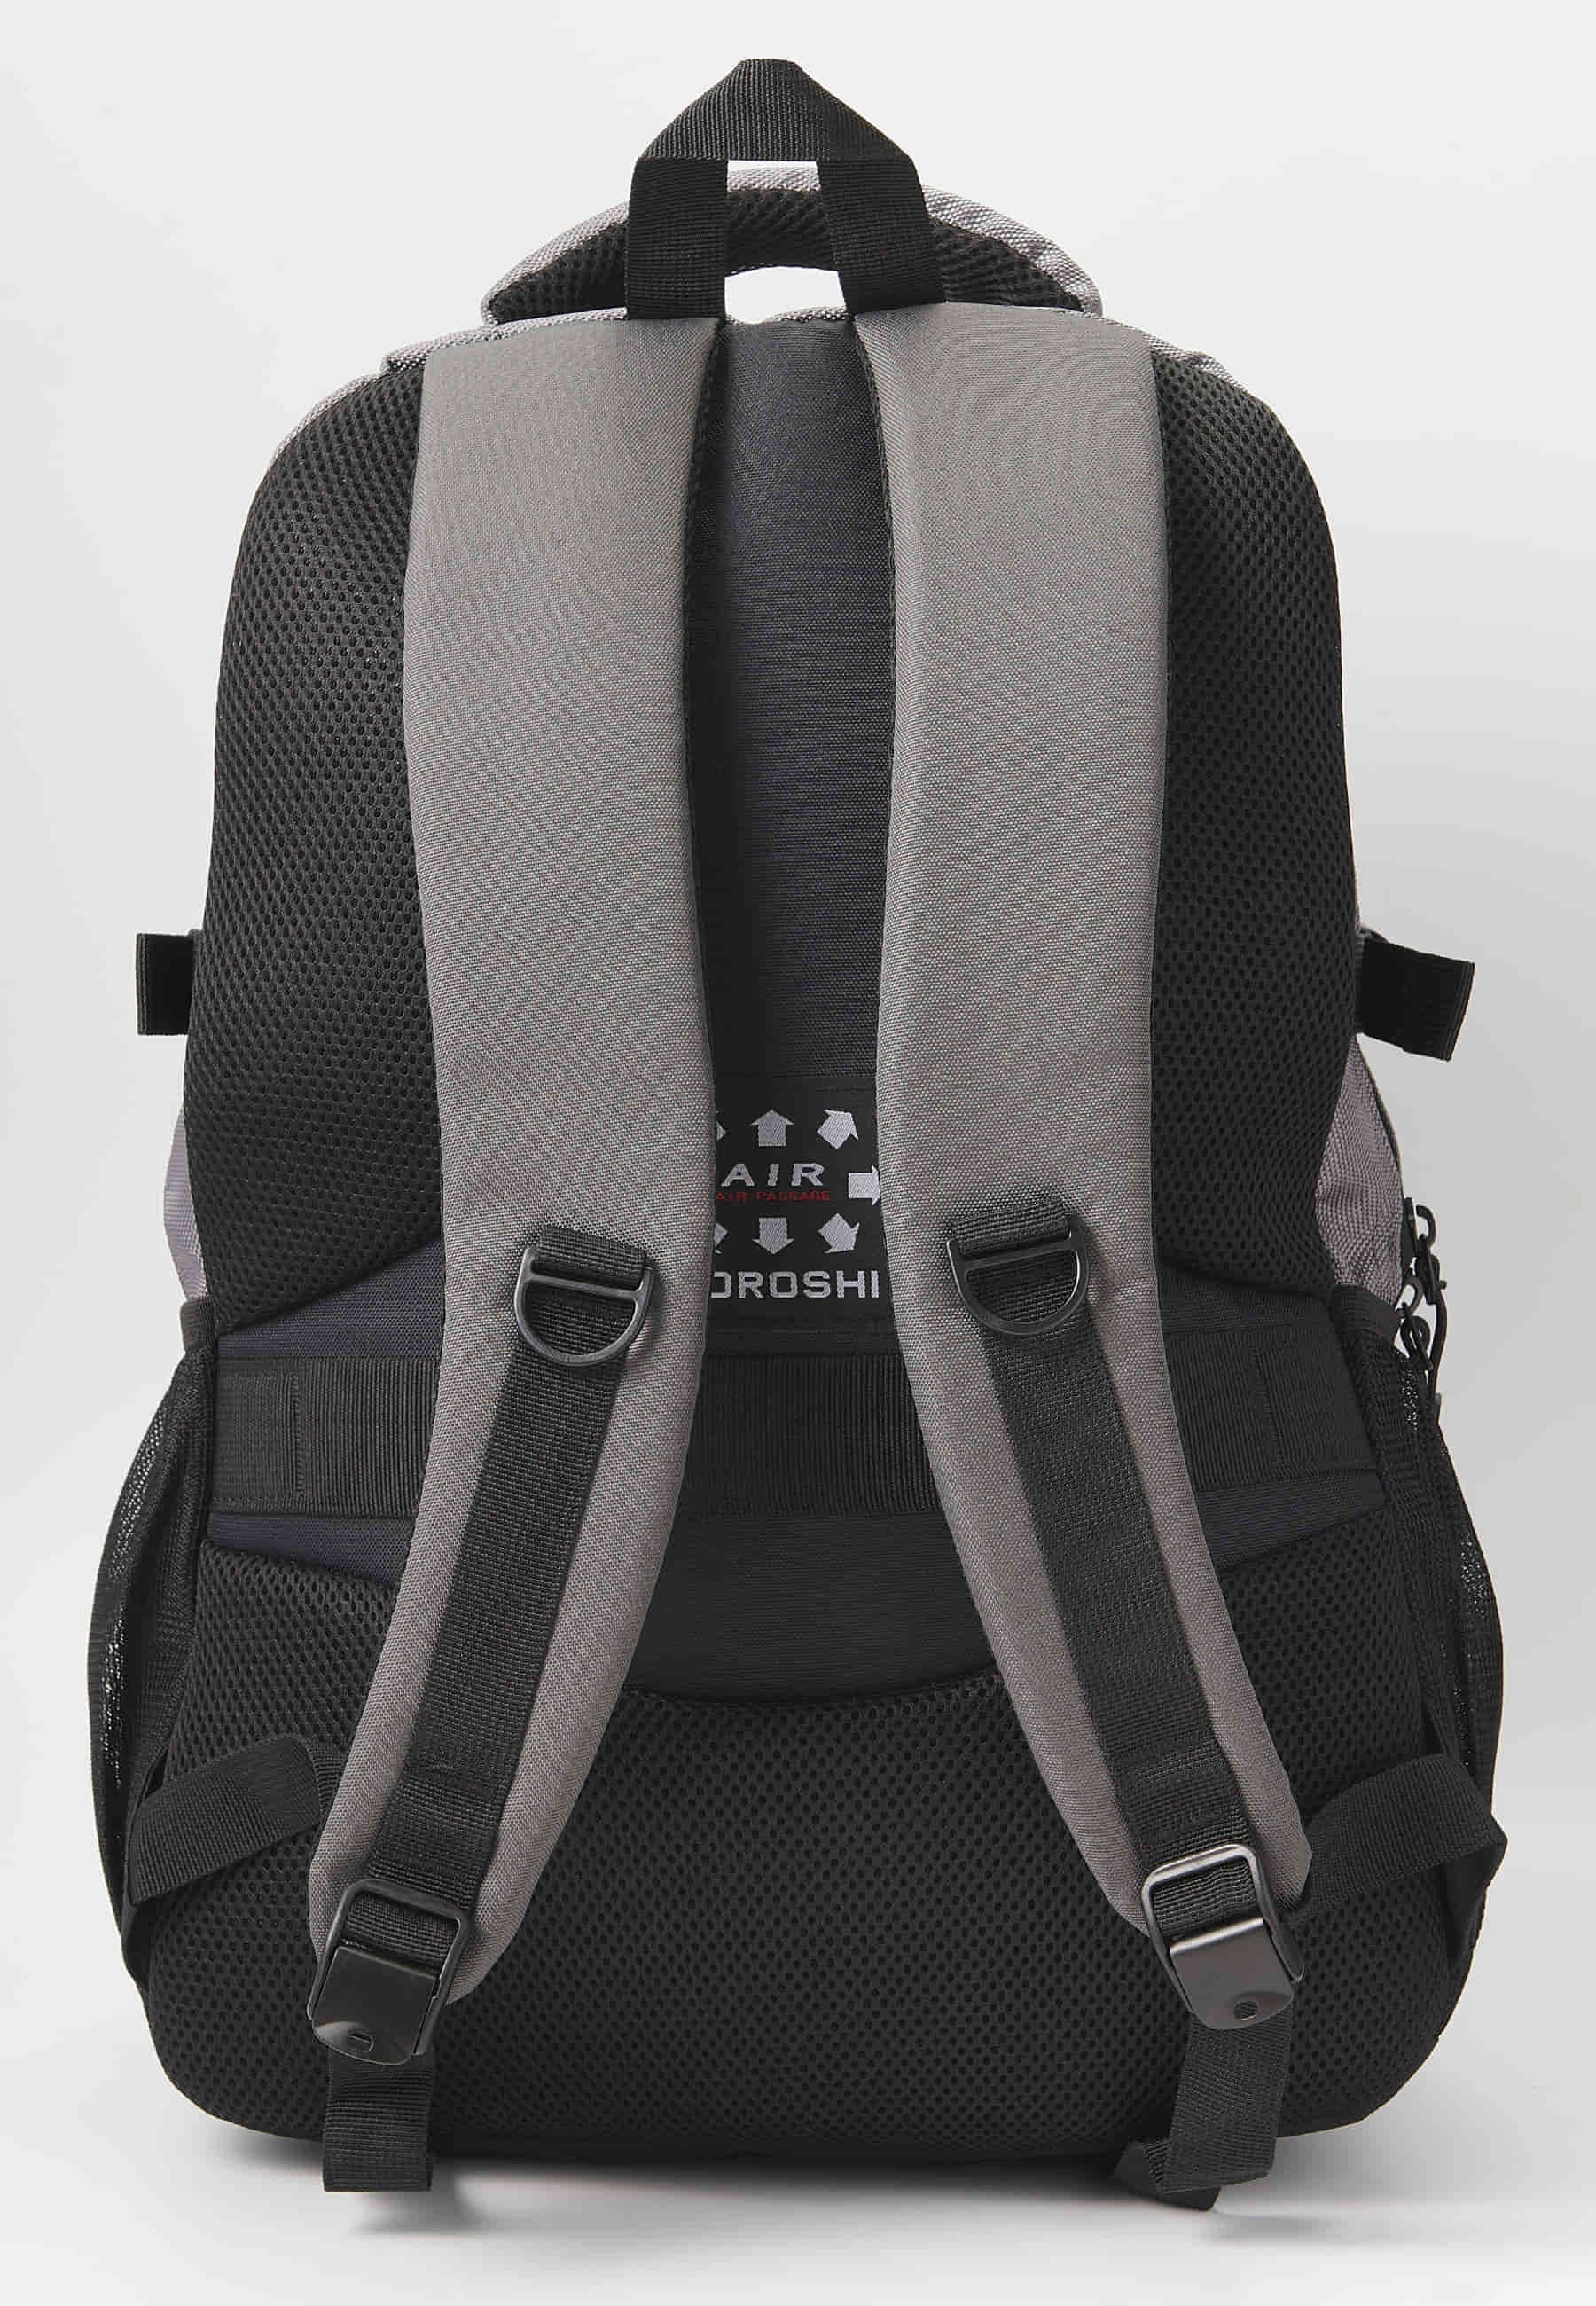 Koröshi backpack with three zippered compartments, one for laptop, with Gray interior pockets 1